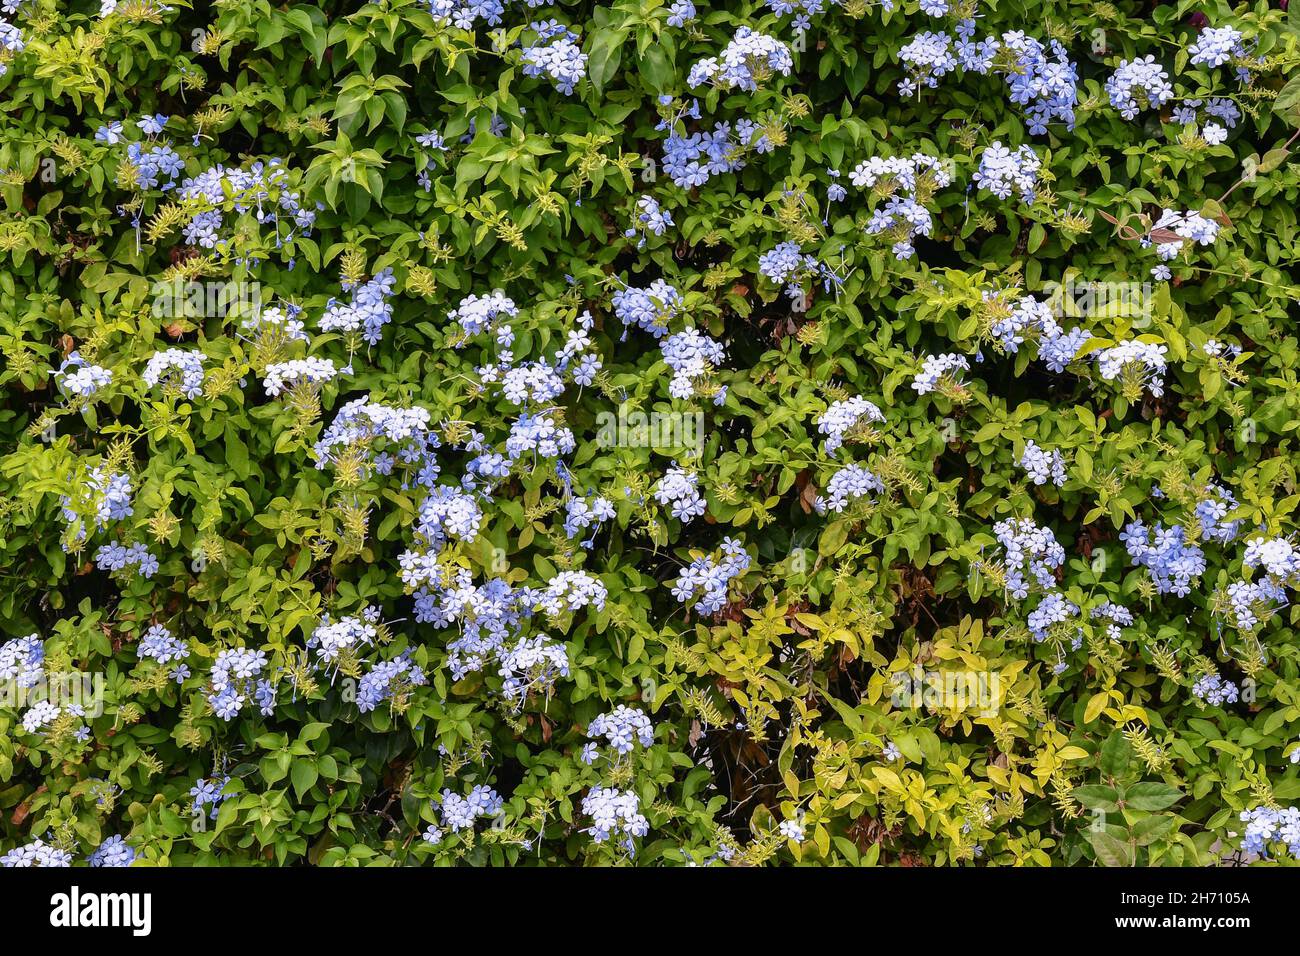 Close-up of a flowering plant of plumbago with blue flowers in summer, Liguria, Italy Stock Photo